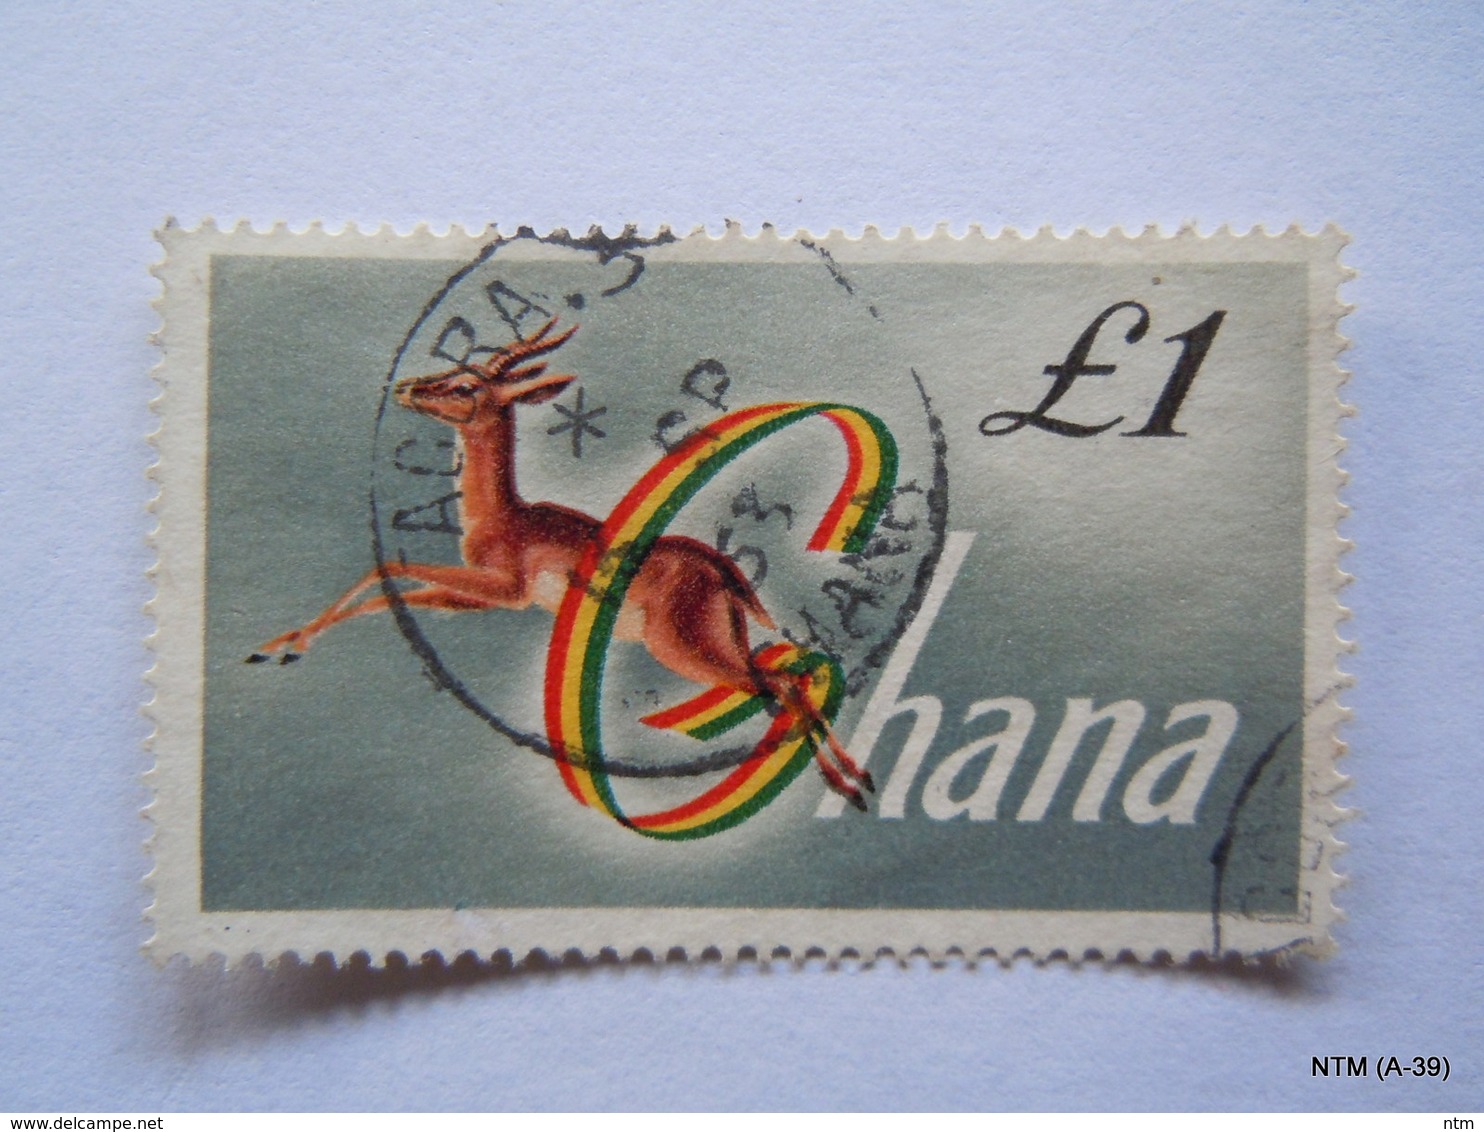 GHANA 1959, 1 Pound Stamp Showing Deer In Action. SG 225a. Used. - Ghana (1957-...)